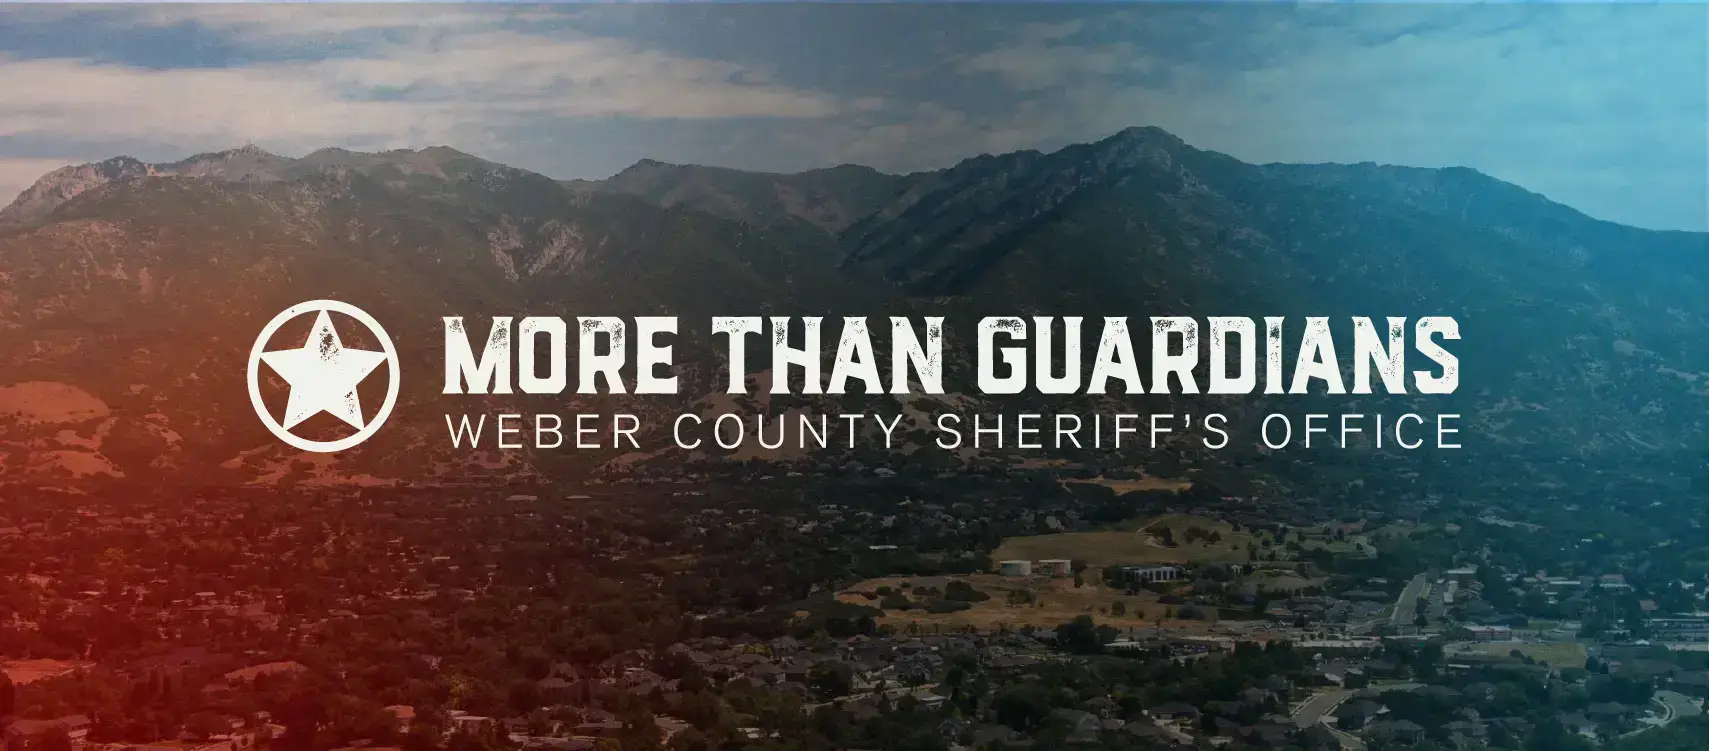 More than guardians. Weber County Sheriff's Office